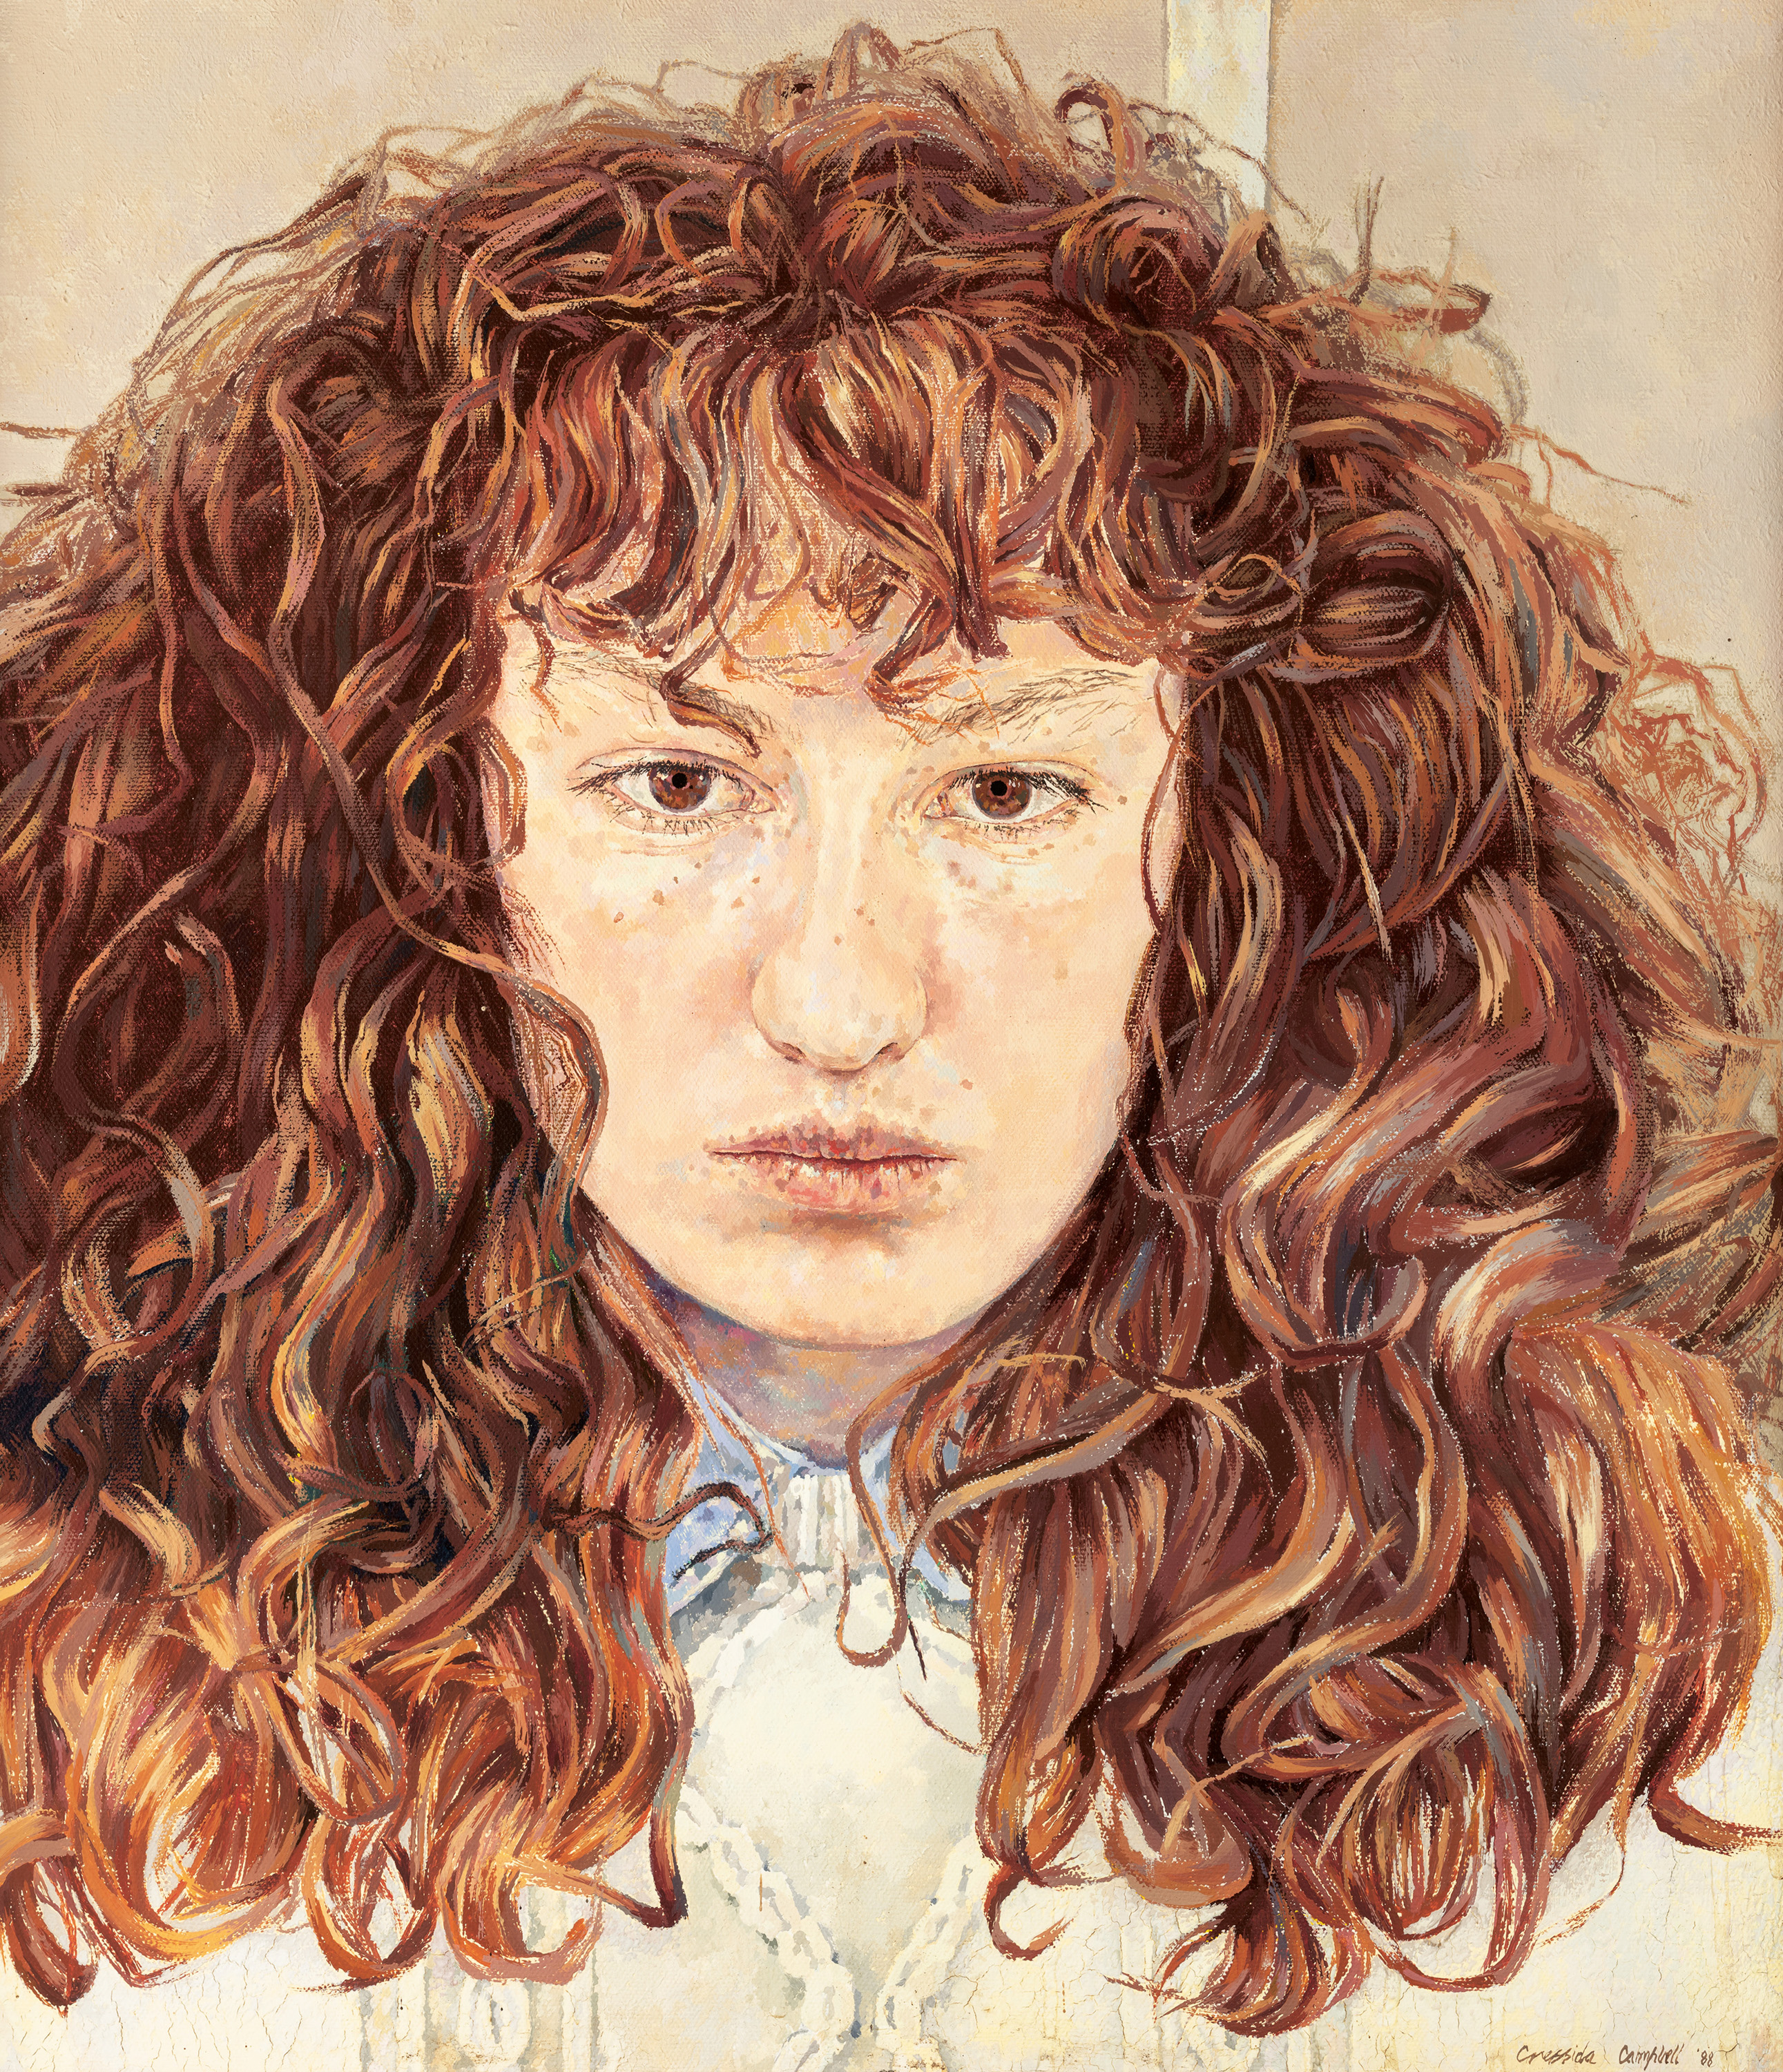 A painting of a woman in her twenties, with a stern expression.  She has bushy brown hair and bangs, and brown eyes.